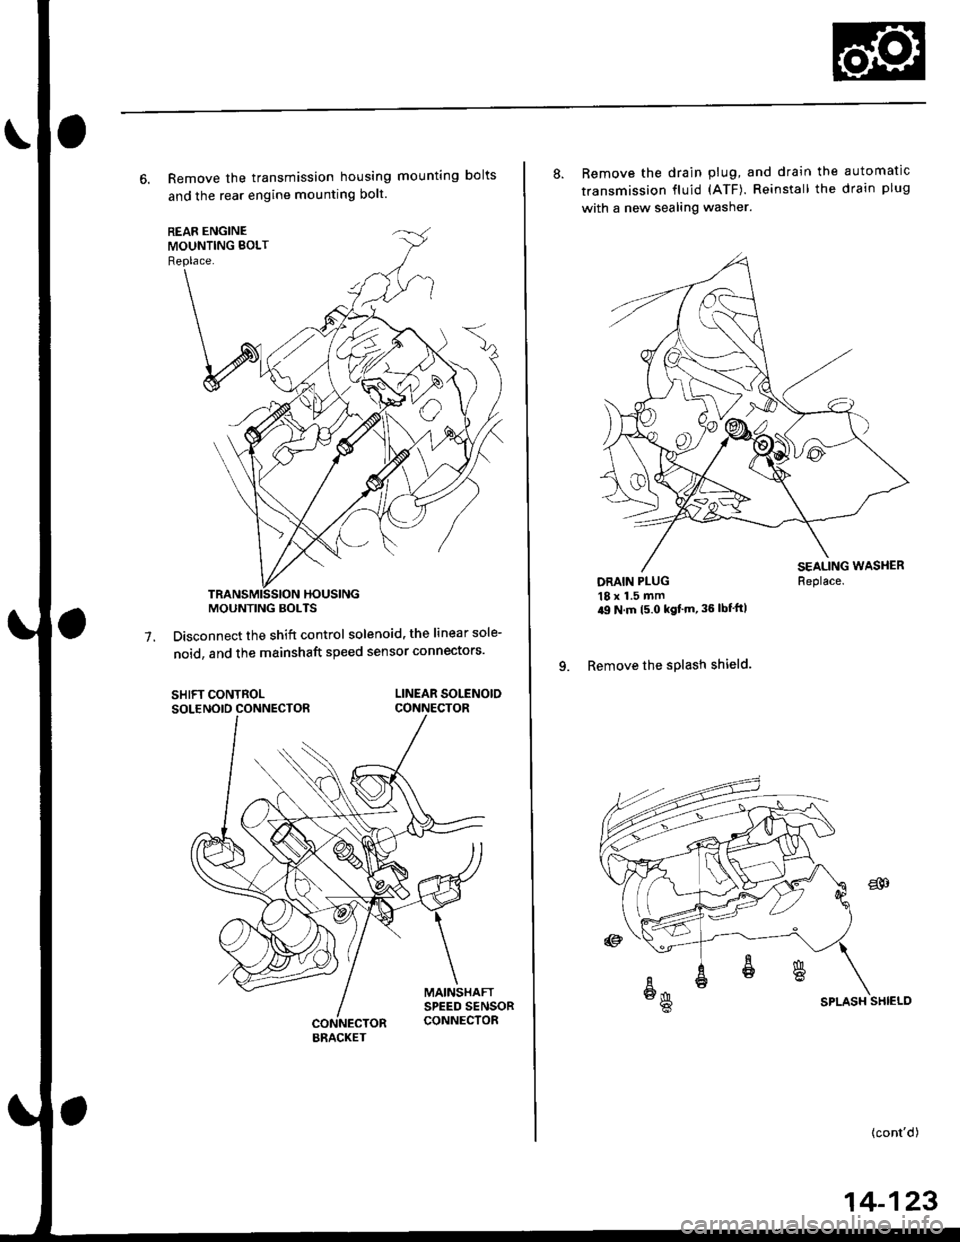 HONDA CIVIC 1999 6.G Workshop Manual 6. Remove the transmission housing mounting bolts
and the rear engine mounting bolt.
Disconnect the shift control solenoid, the linear sole-
noid, and the mainshaft speed sensor connectors7.
SHIFT CO